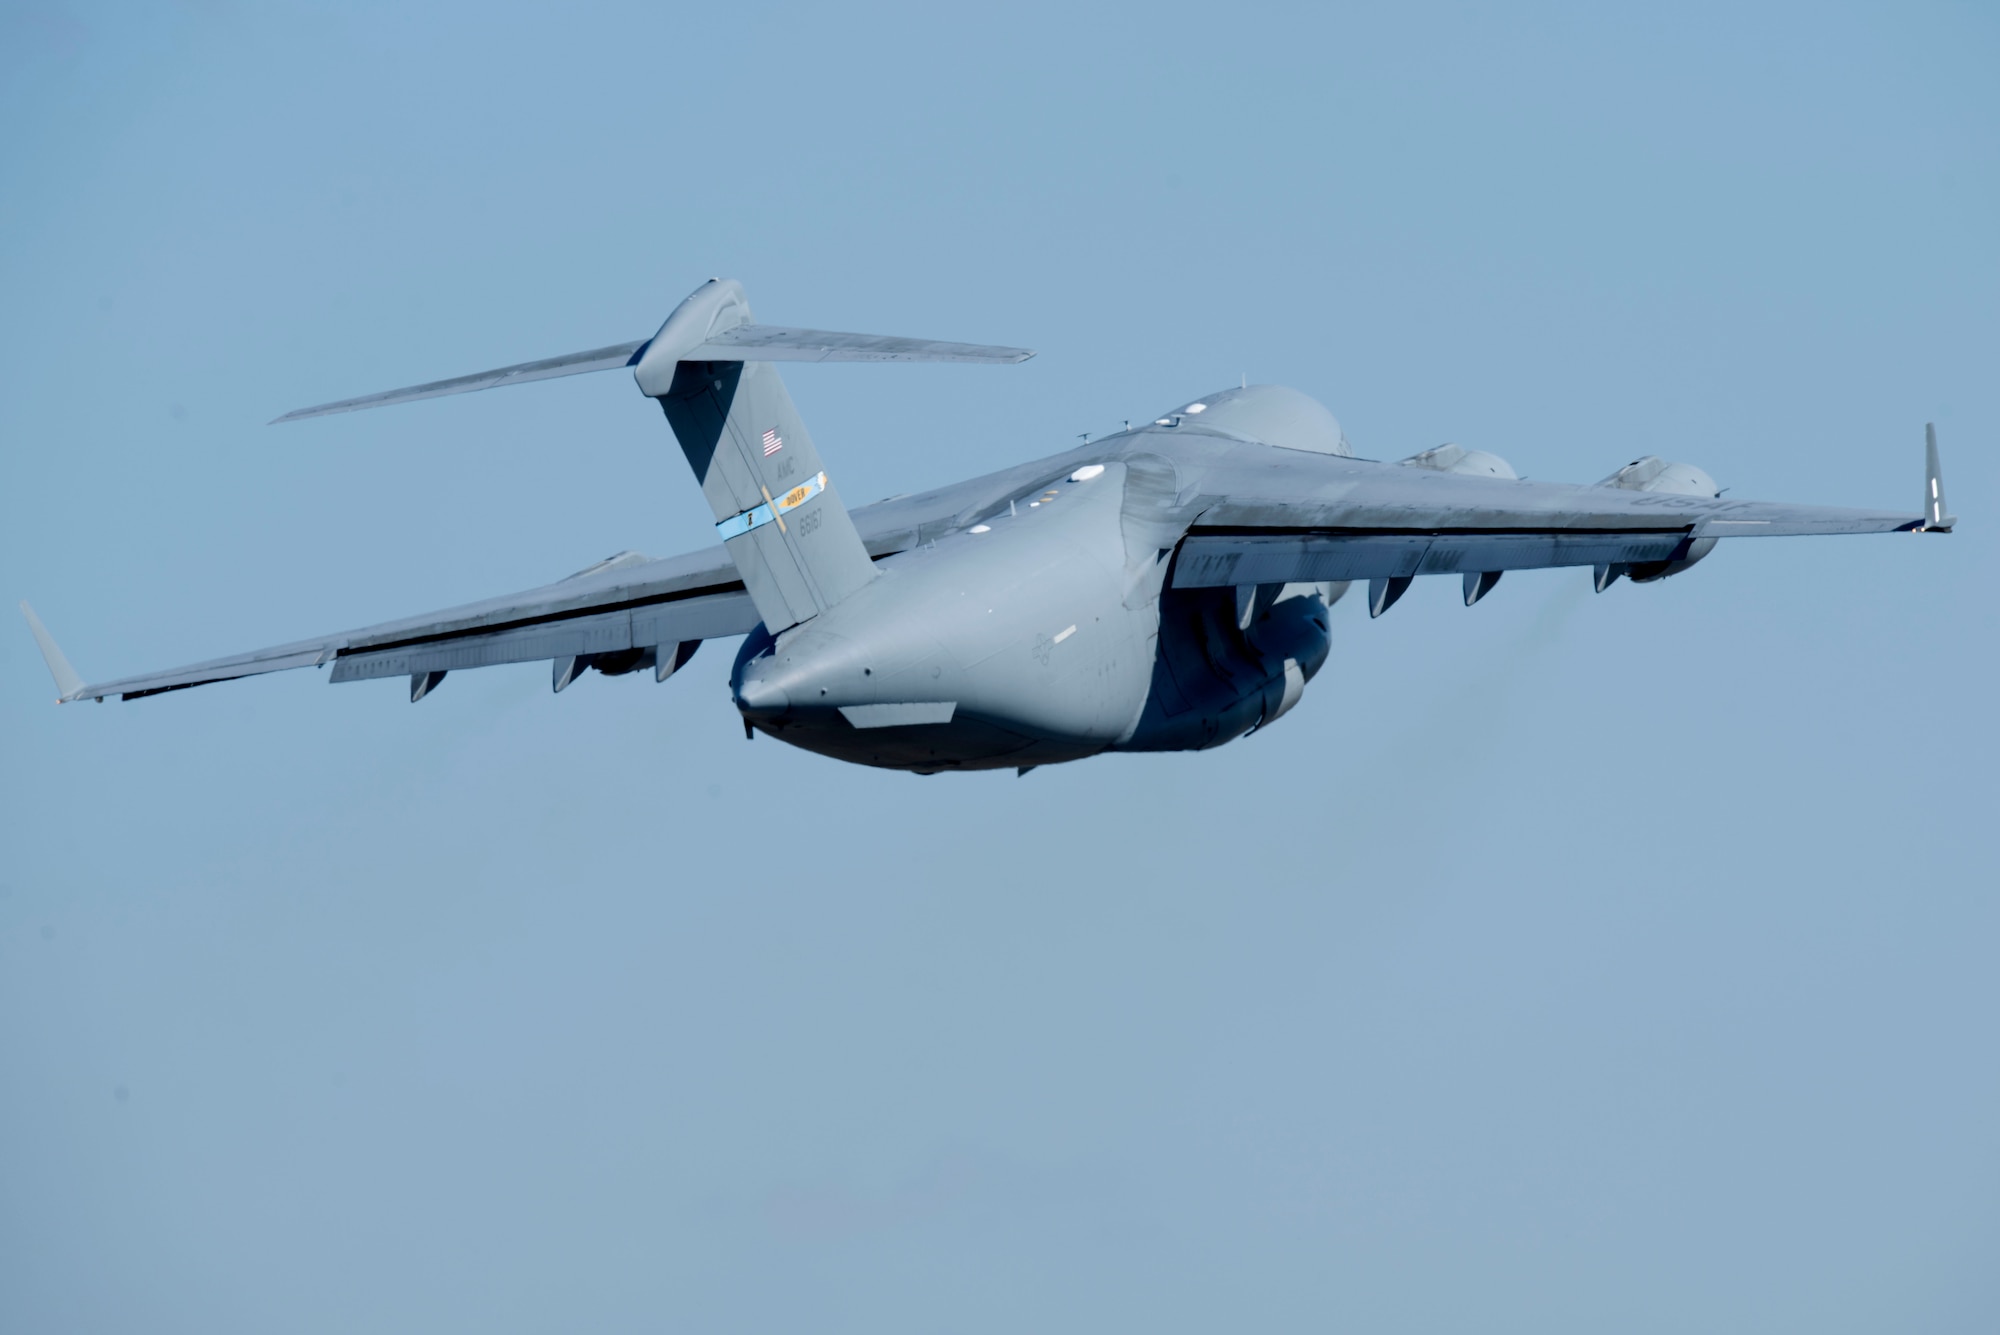 A C-17 Globemaster III assigned to Dover Air Force Base, Delaware, takes off from Royal Air Force Lakenheath, England, May 6, 2020. The aircraft was supporting a 48th Fighter Wing deployment to an undisclosed location in Southwest Asia. (U.S. Air Force photo by Senior Airman Christopher S. Sparks)